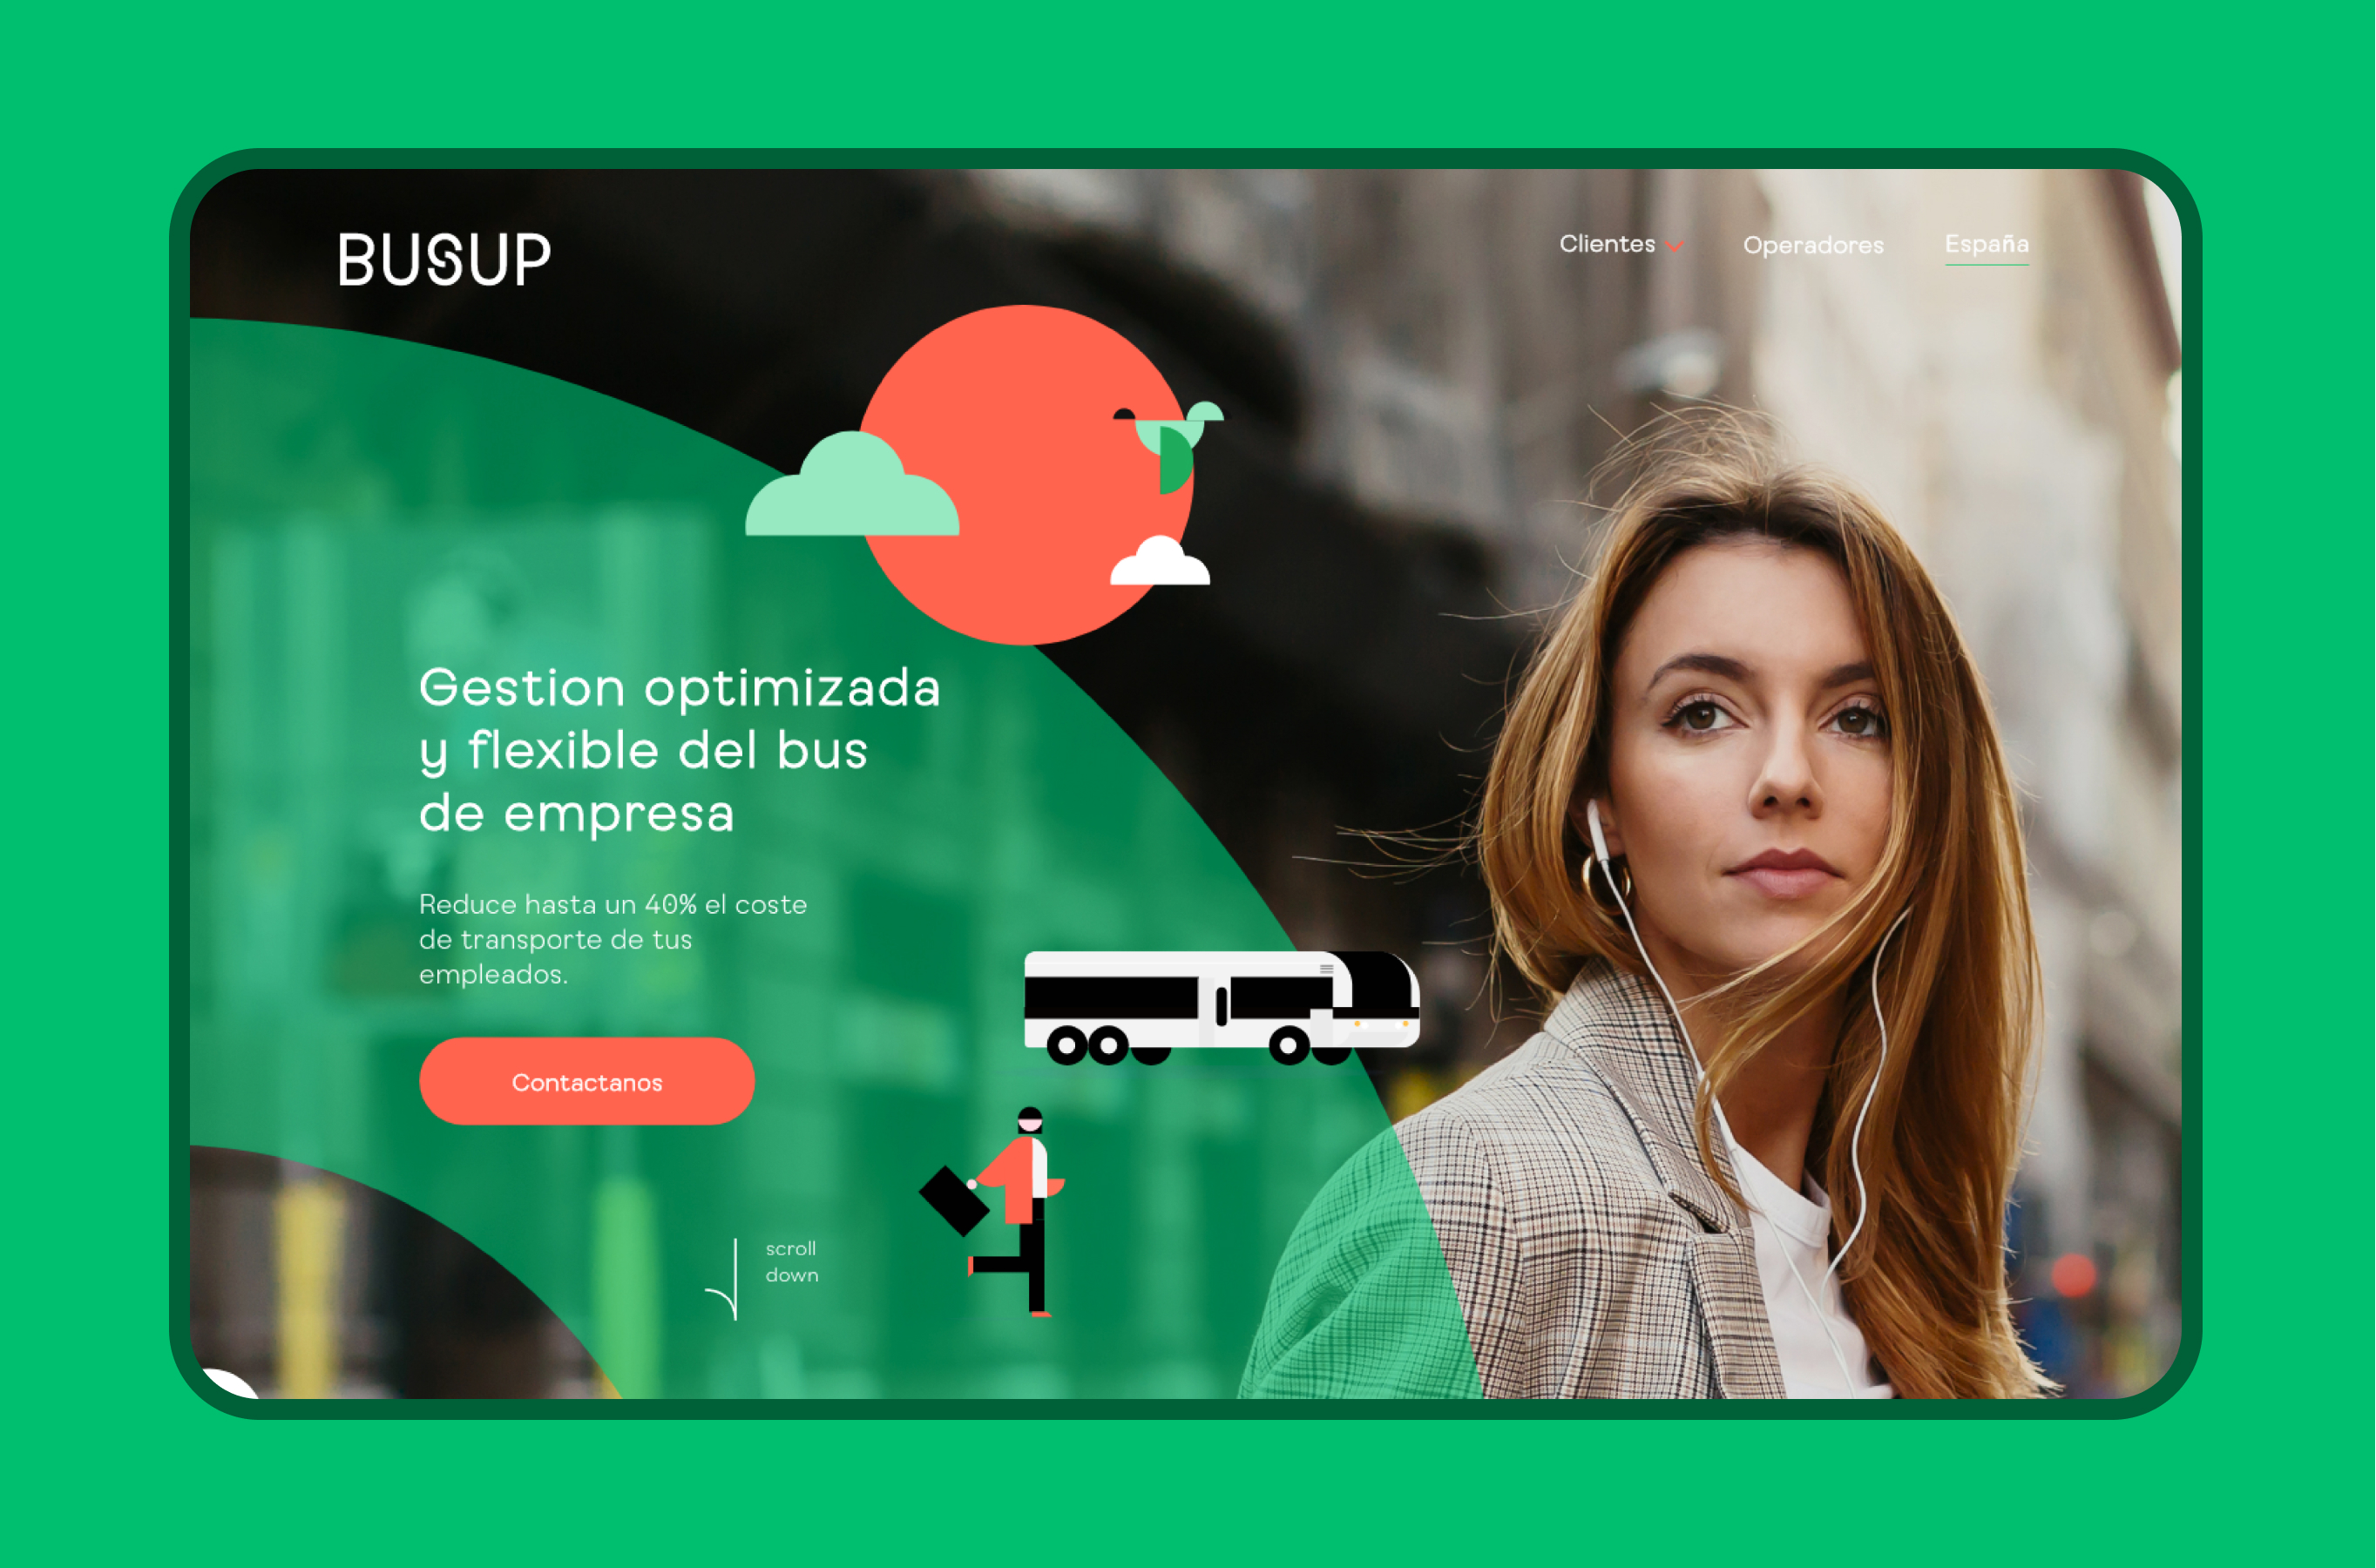 Busup was born to bring shared mobility and needed to update its value proposition in order to compete in corporate mobility to workplaces. We intervened in multiple areas to achieve consistency and differentiation.
